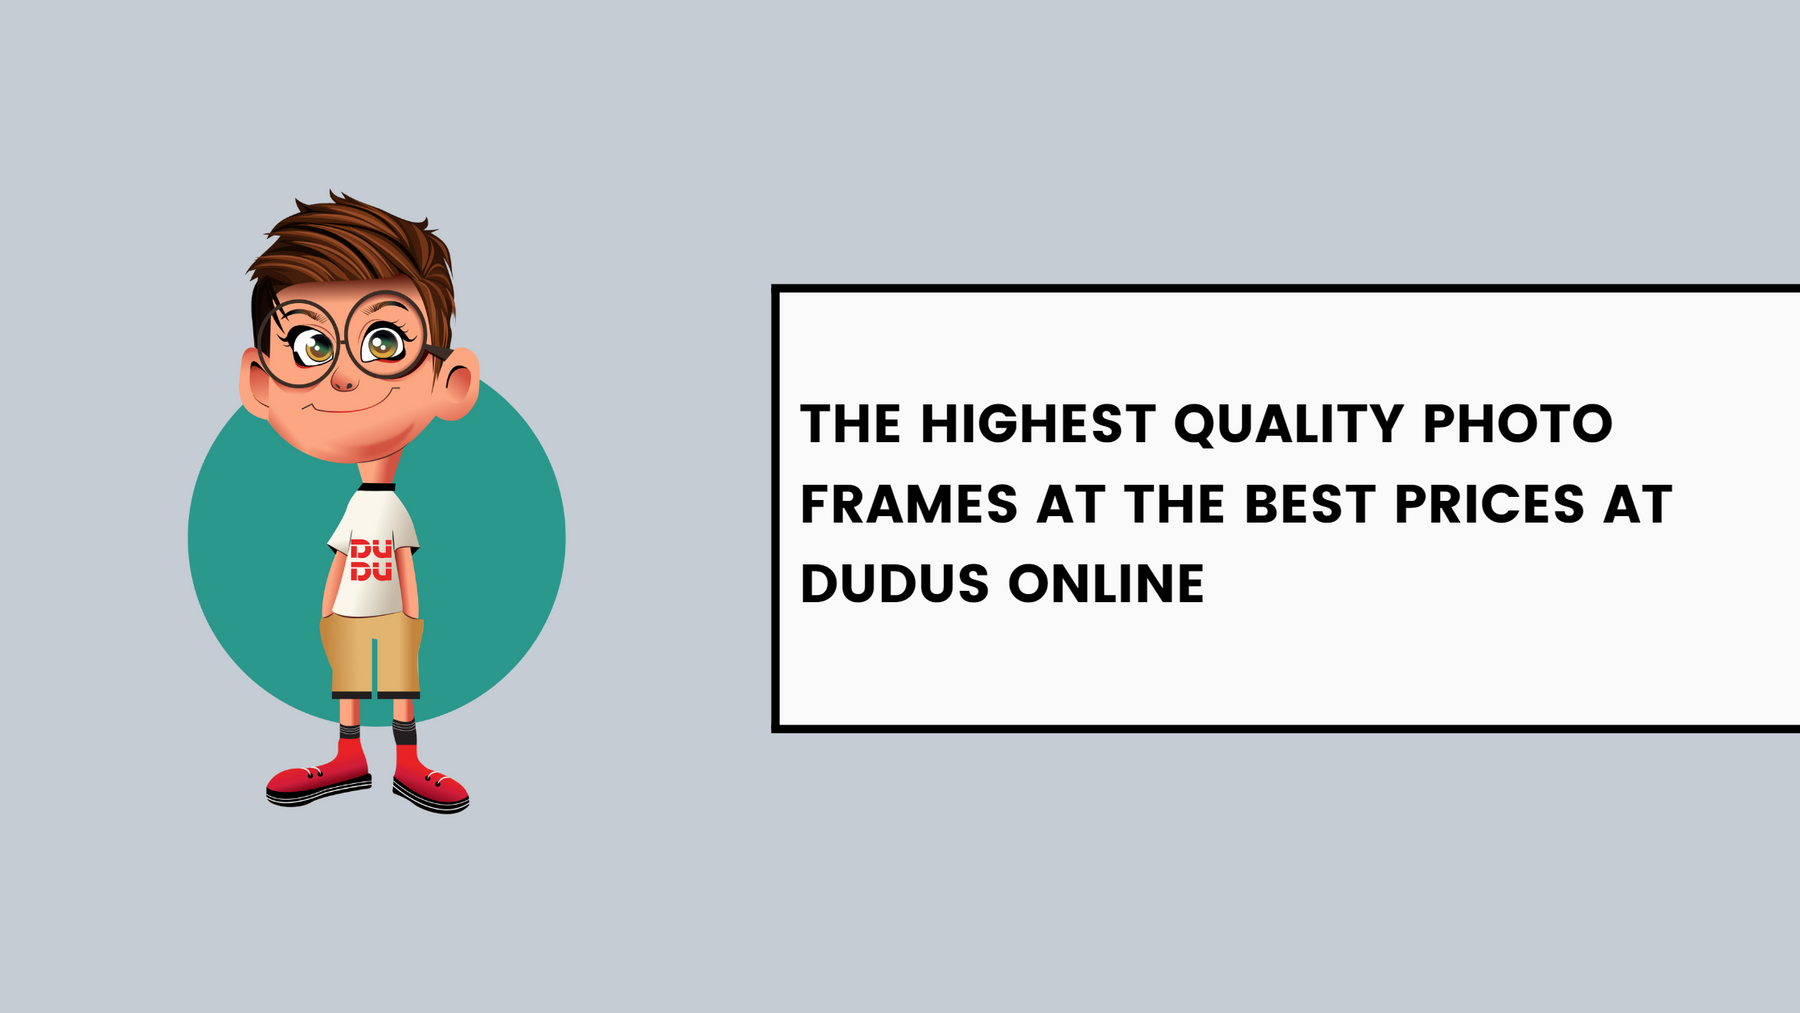 The Highest Quality Photo Frames at the Best Prices at Dudus Online